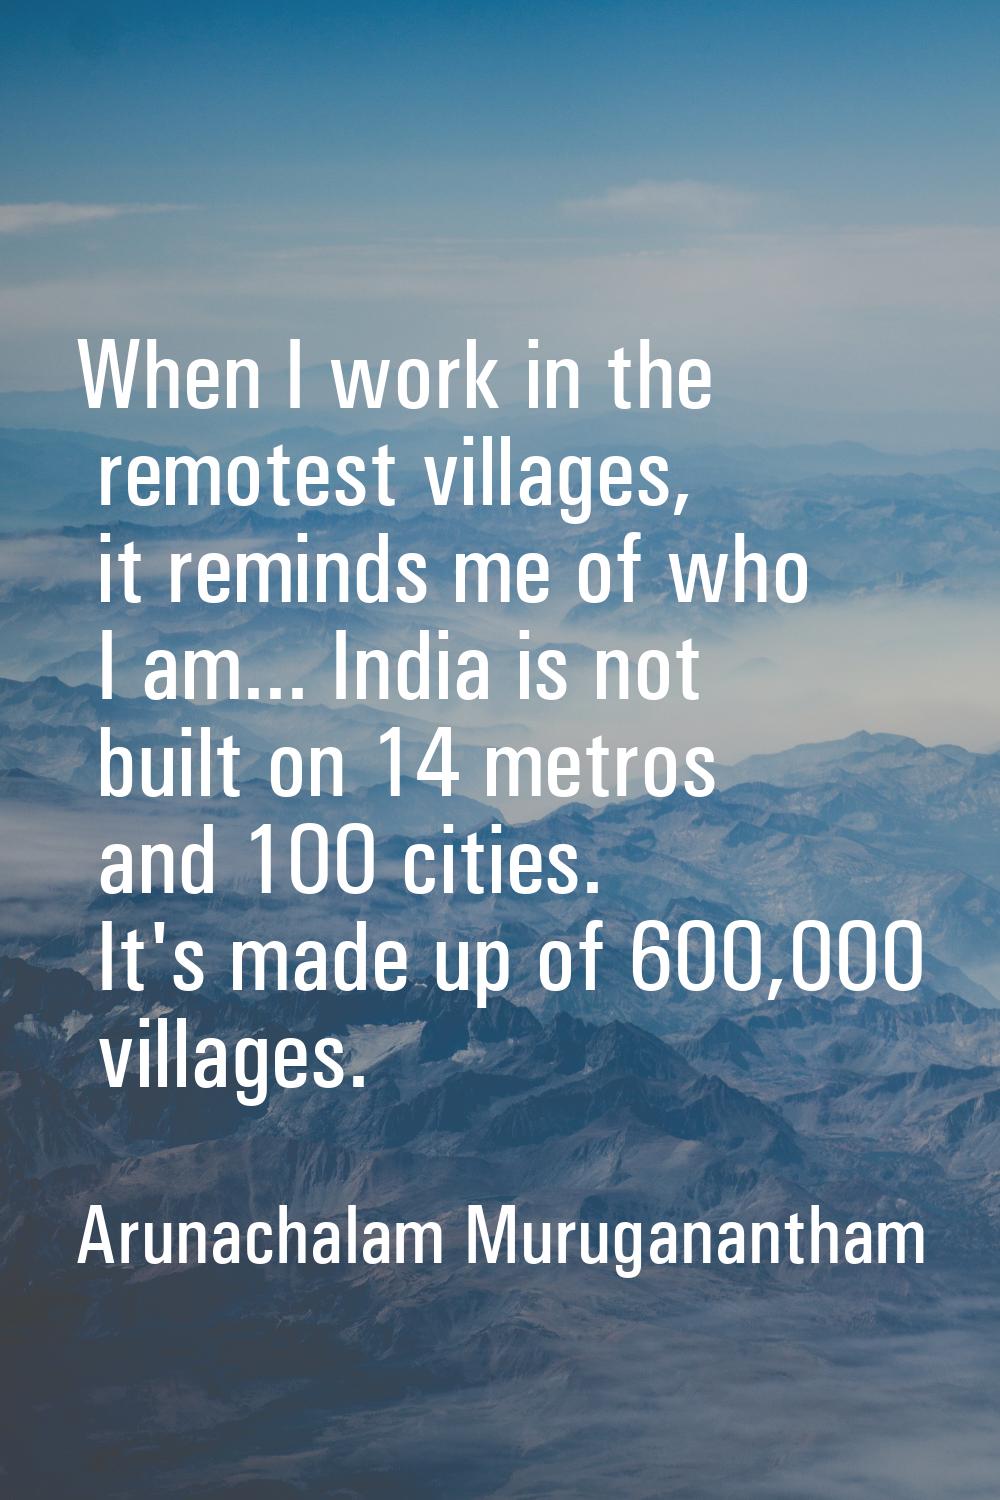 When I work in the remotest villages, it reminds me of who I am... India is not built on 14 metros 